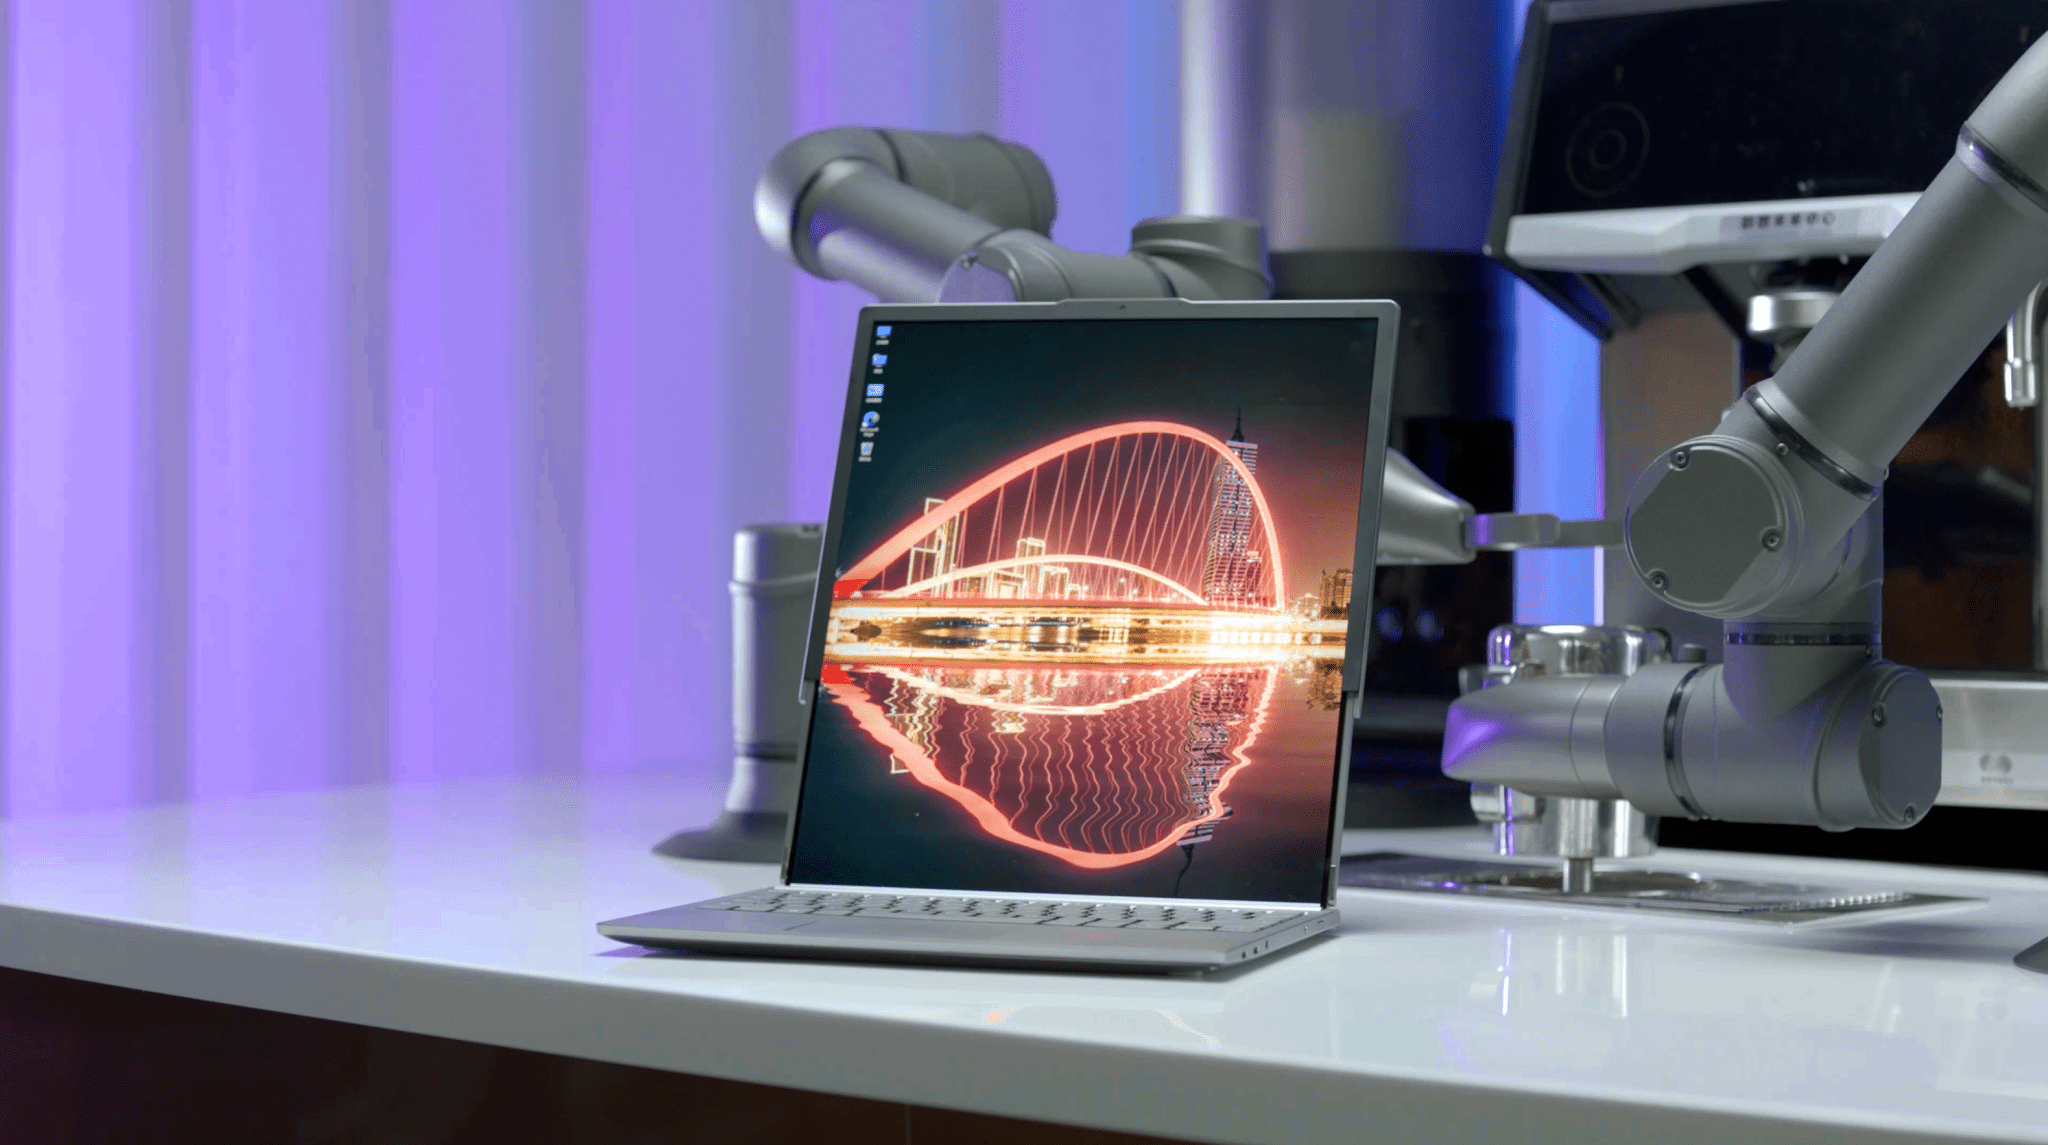 Lenovo’s proof-of-concept rollable PC